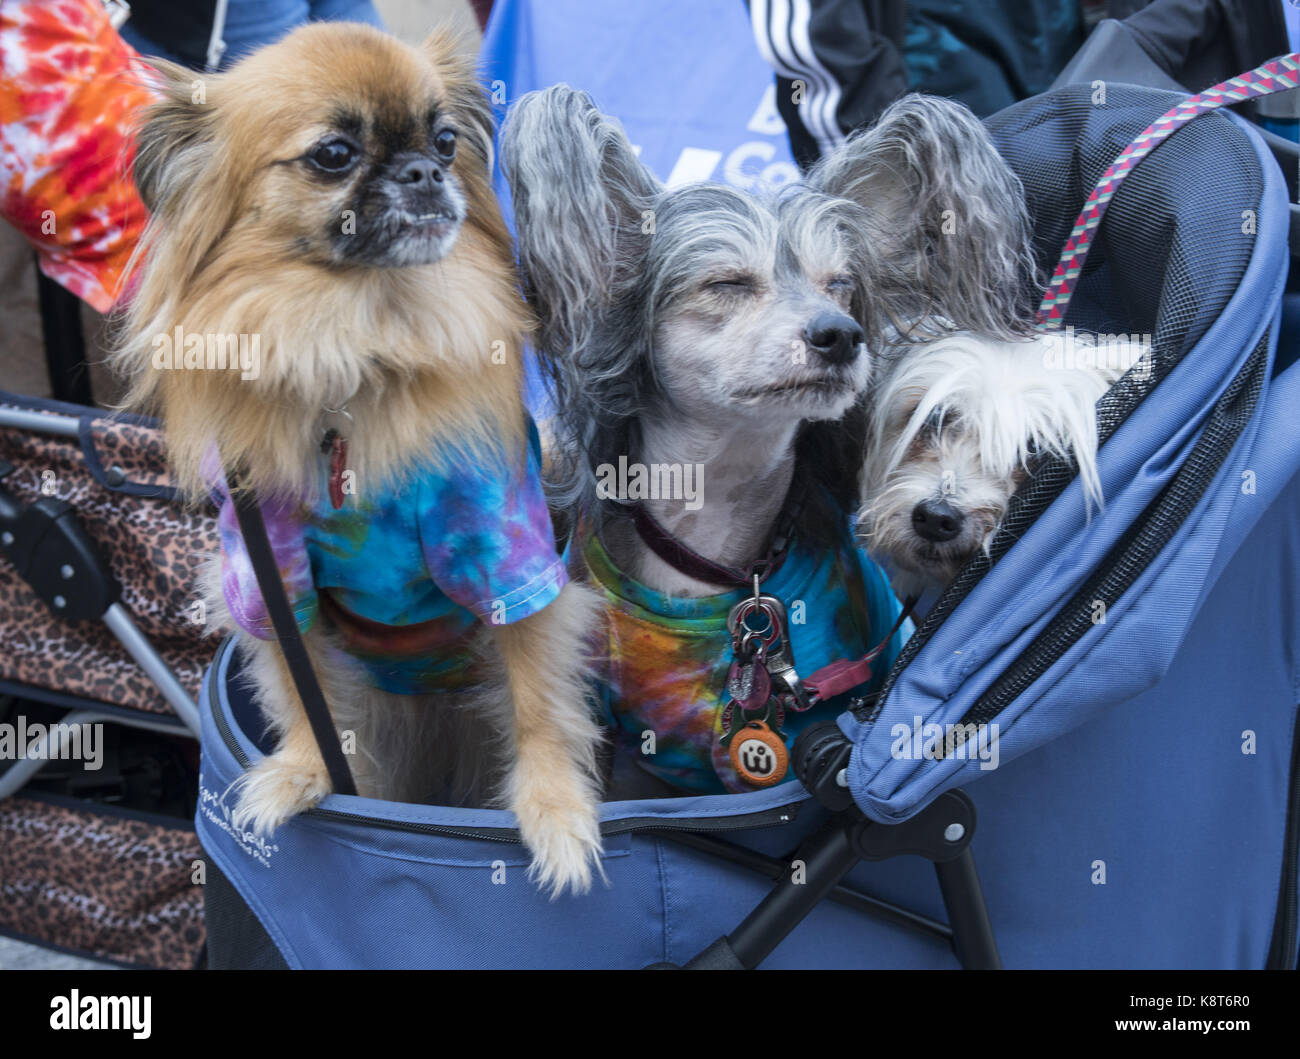 Animal lovers celebrate National Dog Day at the Brooklyn Public Library with a dog fashion show on the green carpet. National Dog Day is celebrated August 26th annually and was founded in 2004 by Pet & Family Lifestyle Expert and Animal Advocate,  Colleen Paige. Stock Photo